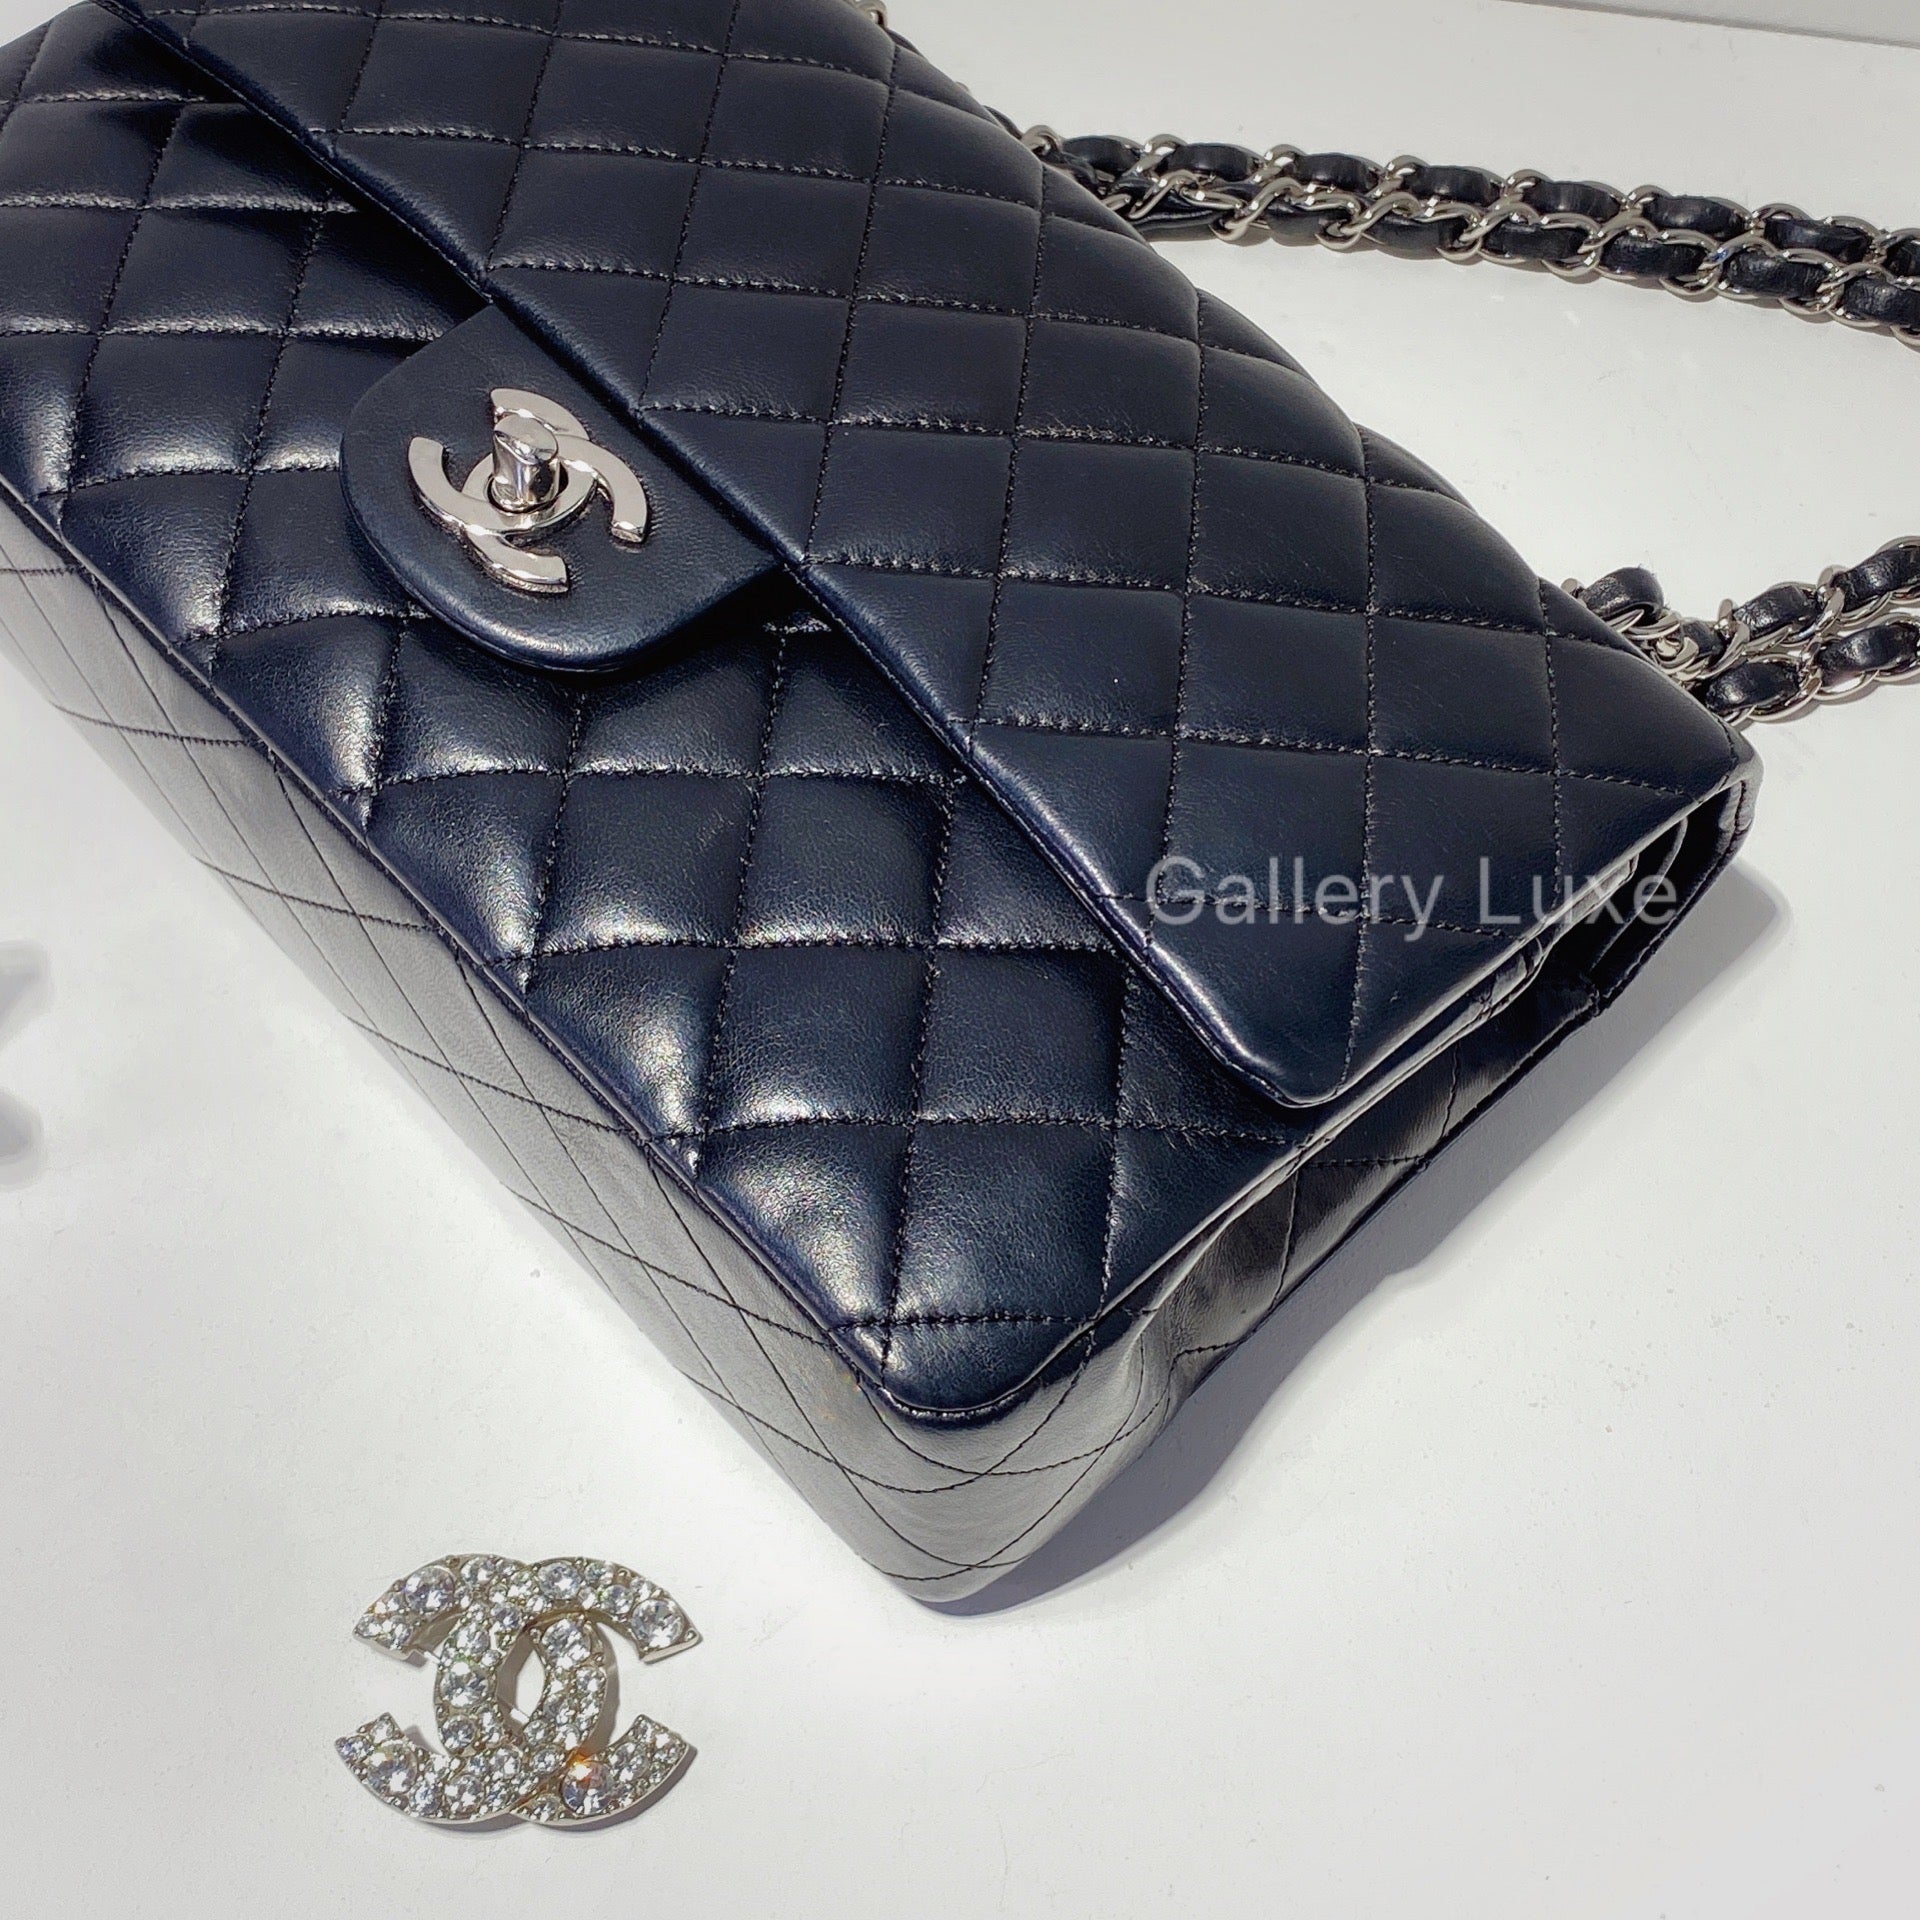 No.2216-Chanel Lambskin Classic Flap Bag 25cm – Gallery Luxe